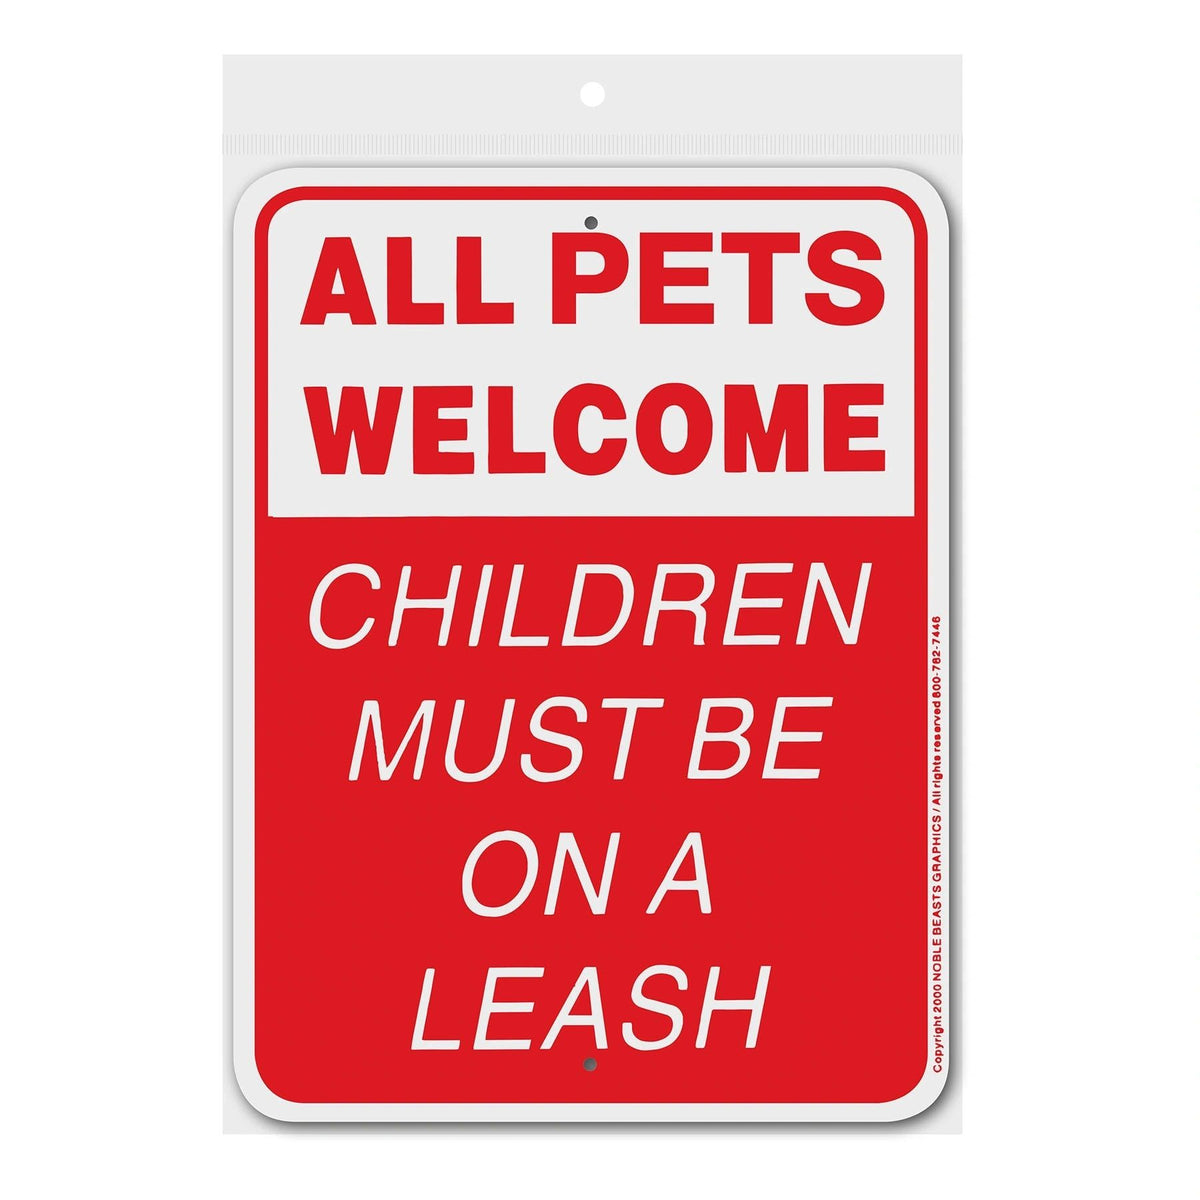 All Pets Welcome - Children Must be on a Leash Sign Aluminum 9 in X 12 in #3245316